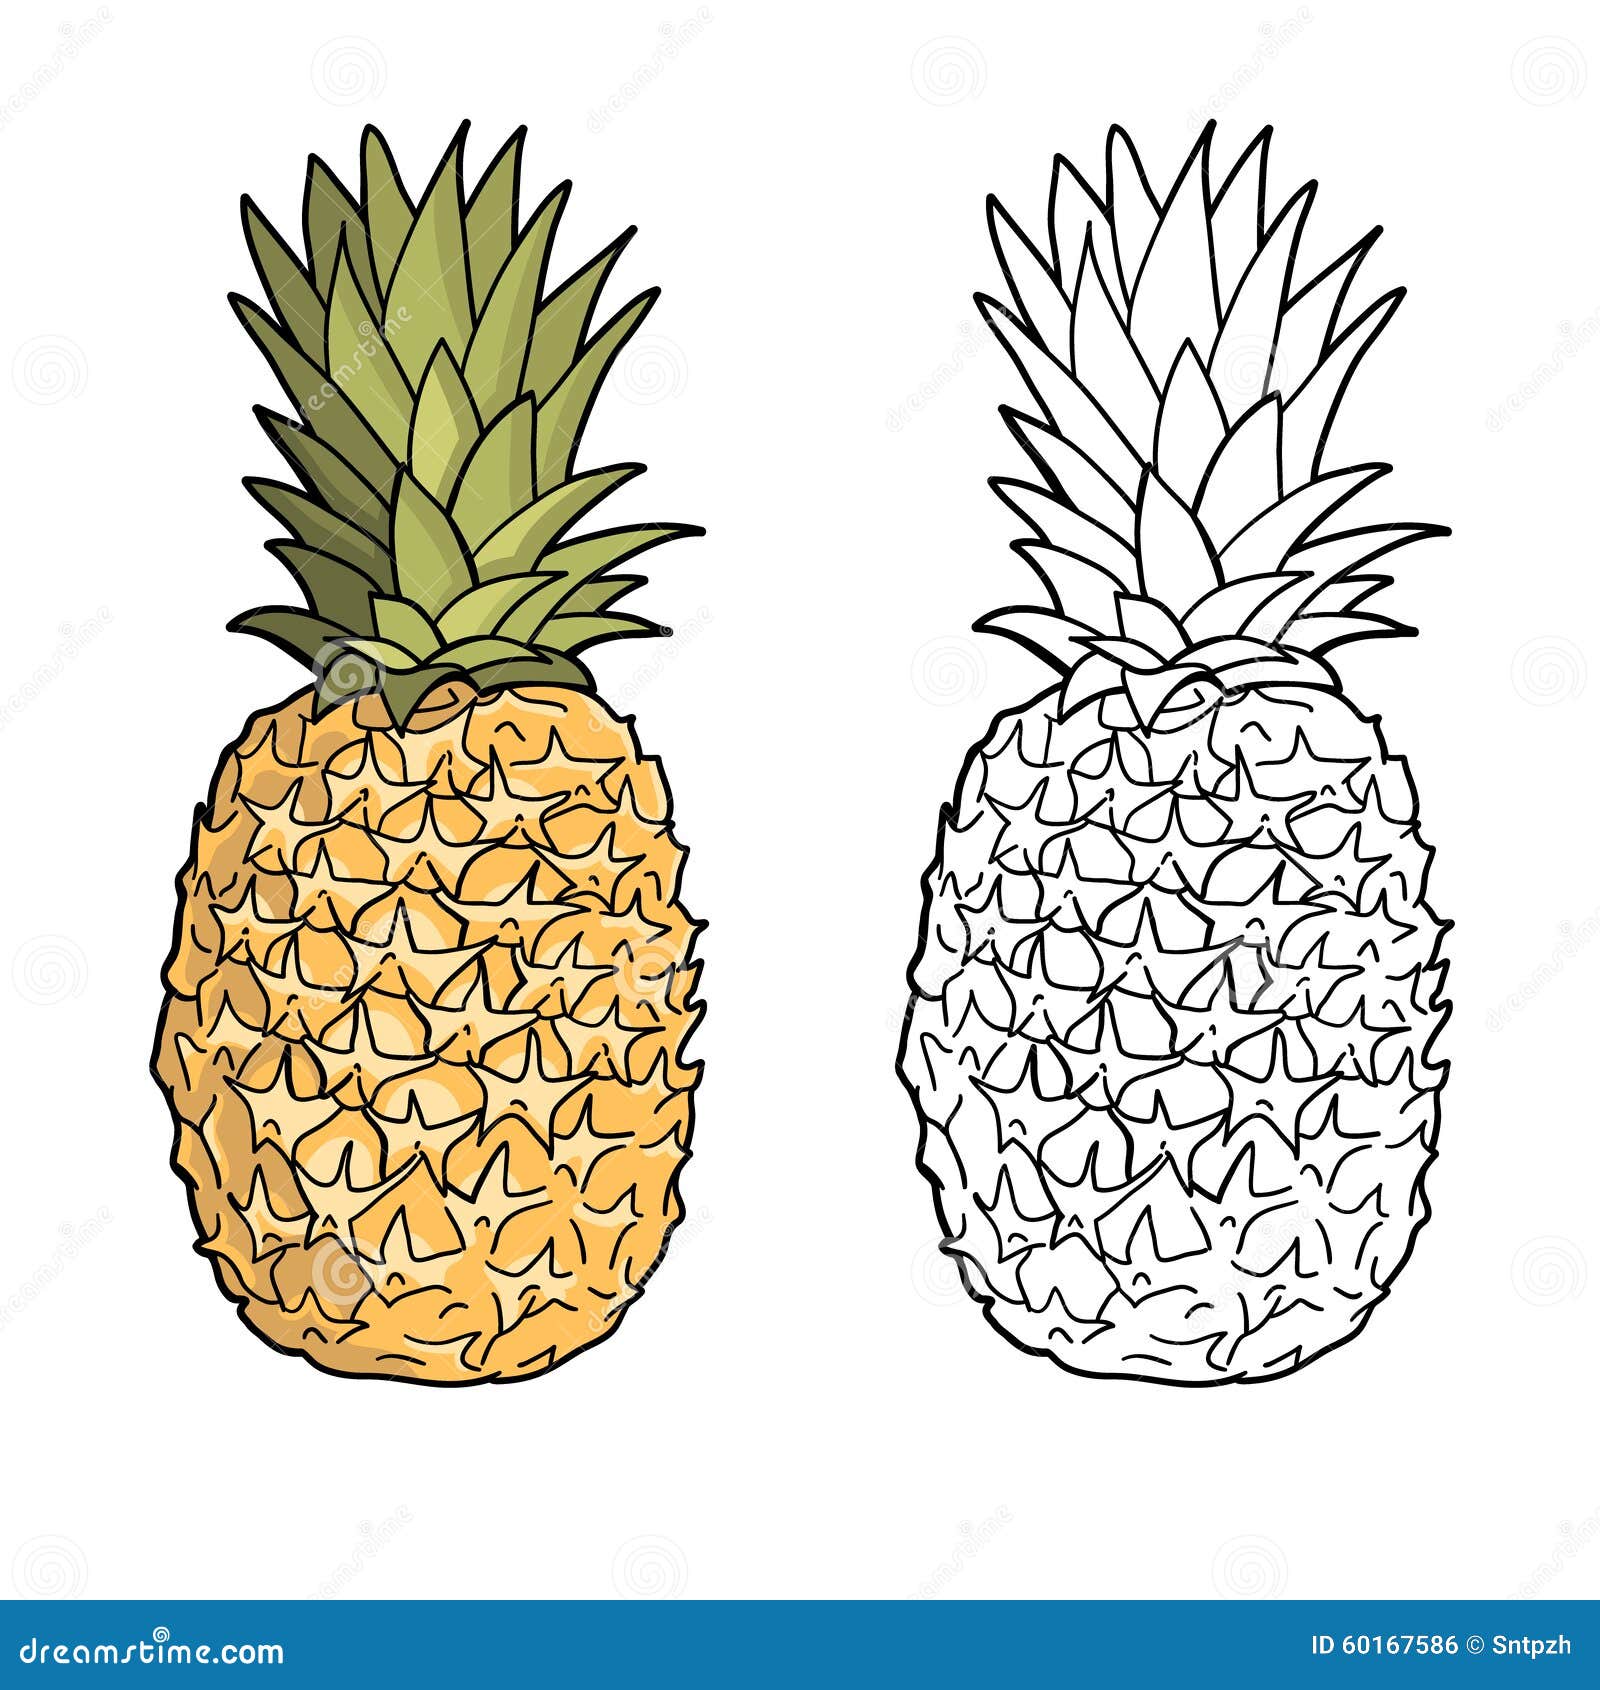 pineapples. graphic stylized drawing.